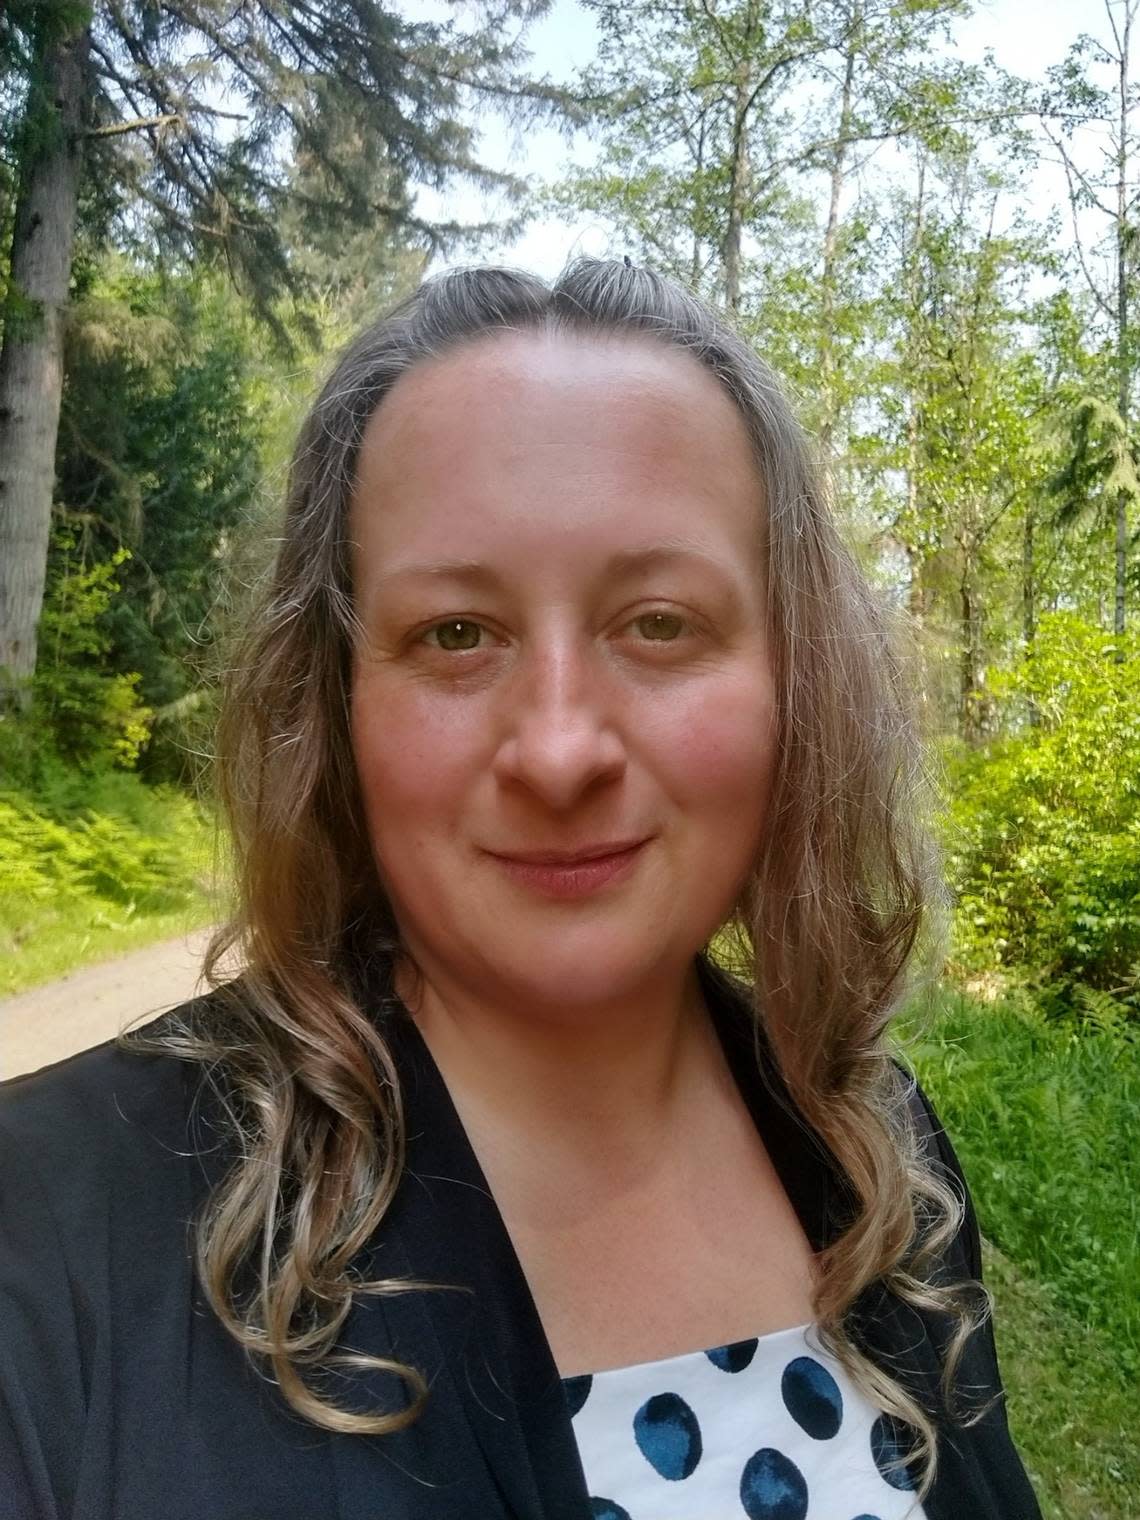 Katherine Orlowski is one of three people running for the District 4 seat on the Whatcom County Council in the Aug. 1 primary election.